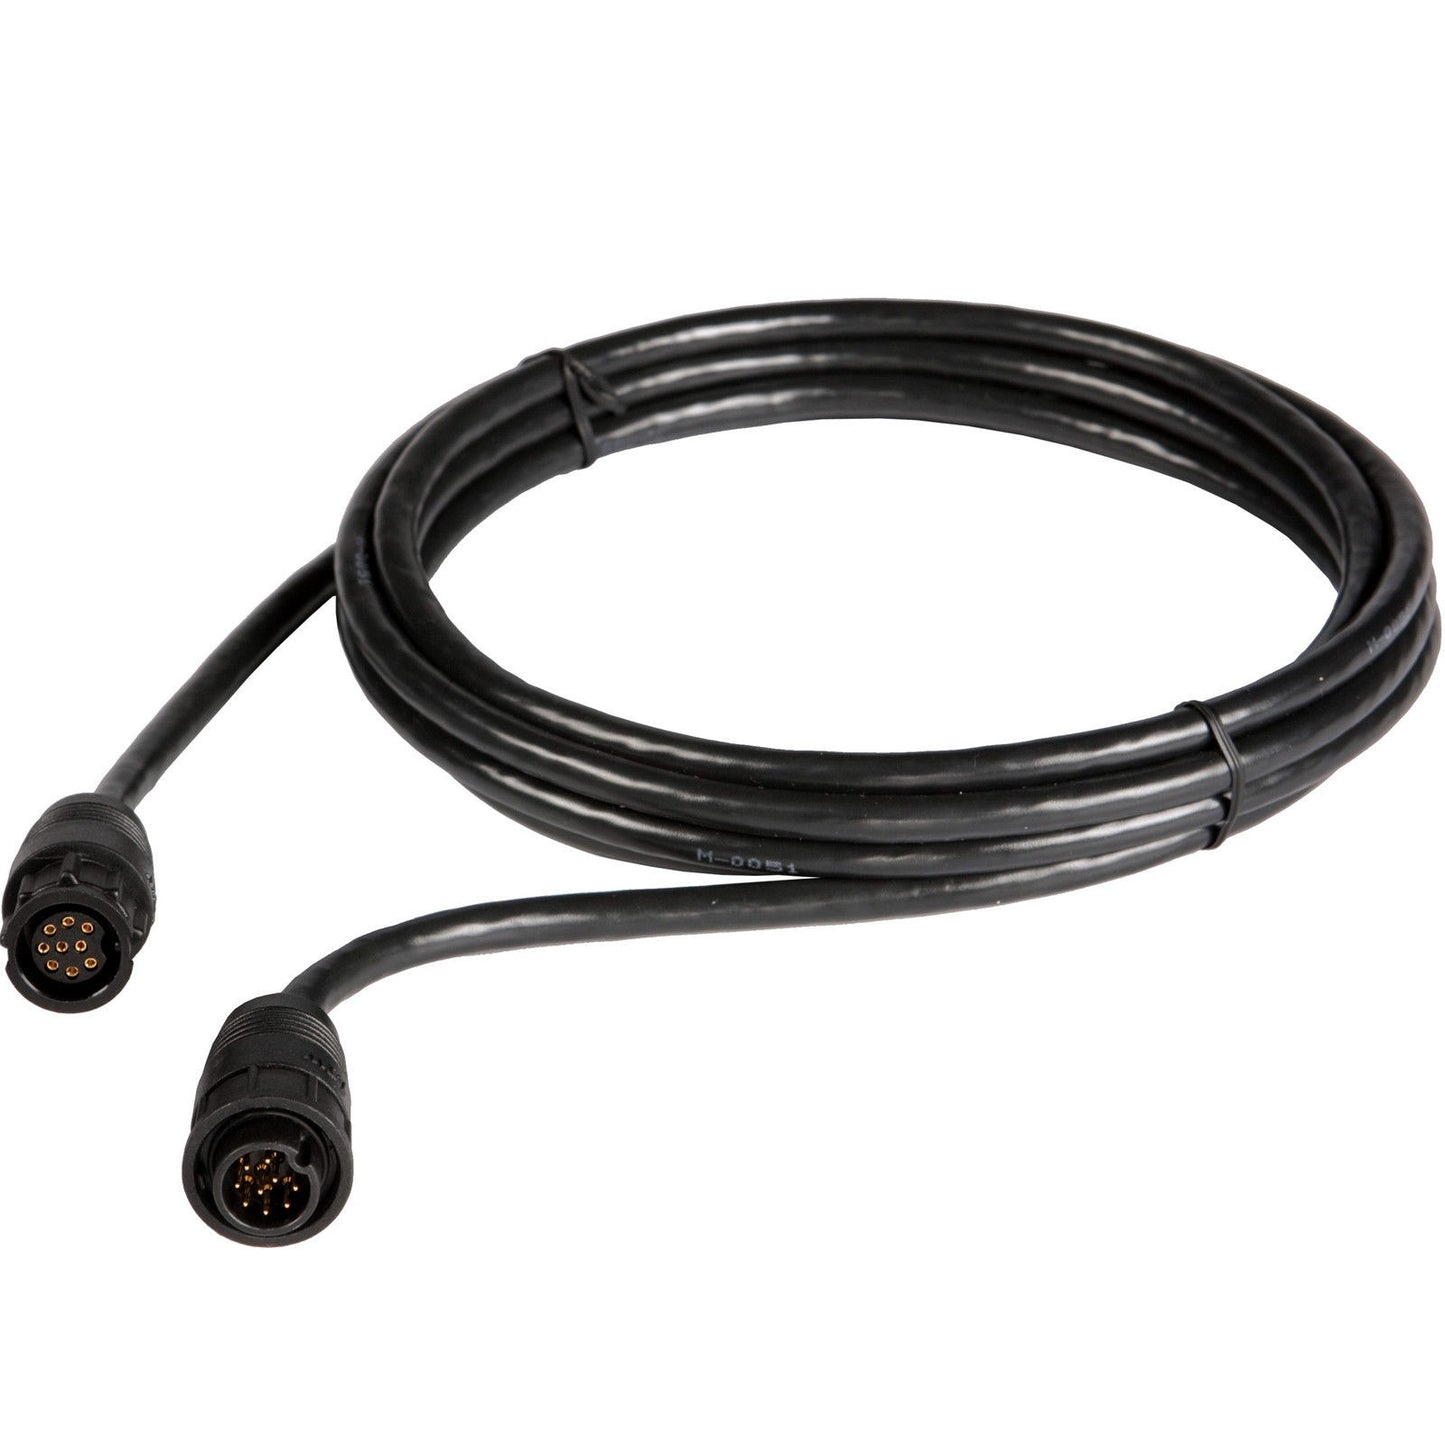 B&G-000-00099-006-StructureScan™ Transducer extension cable (10ft)